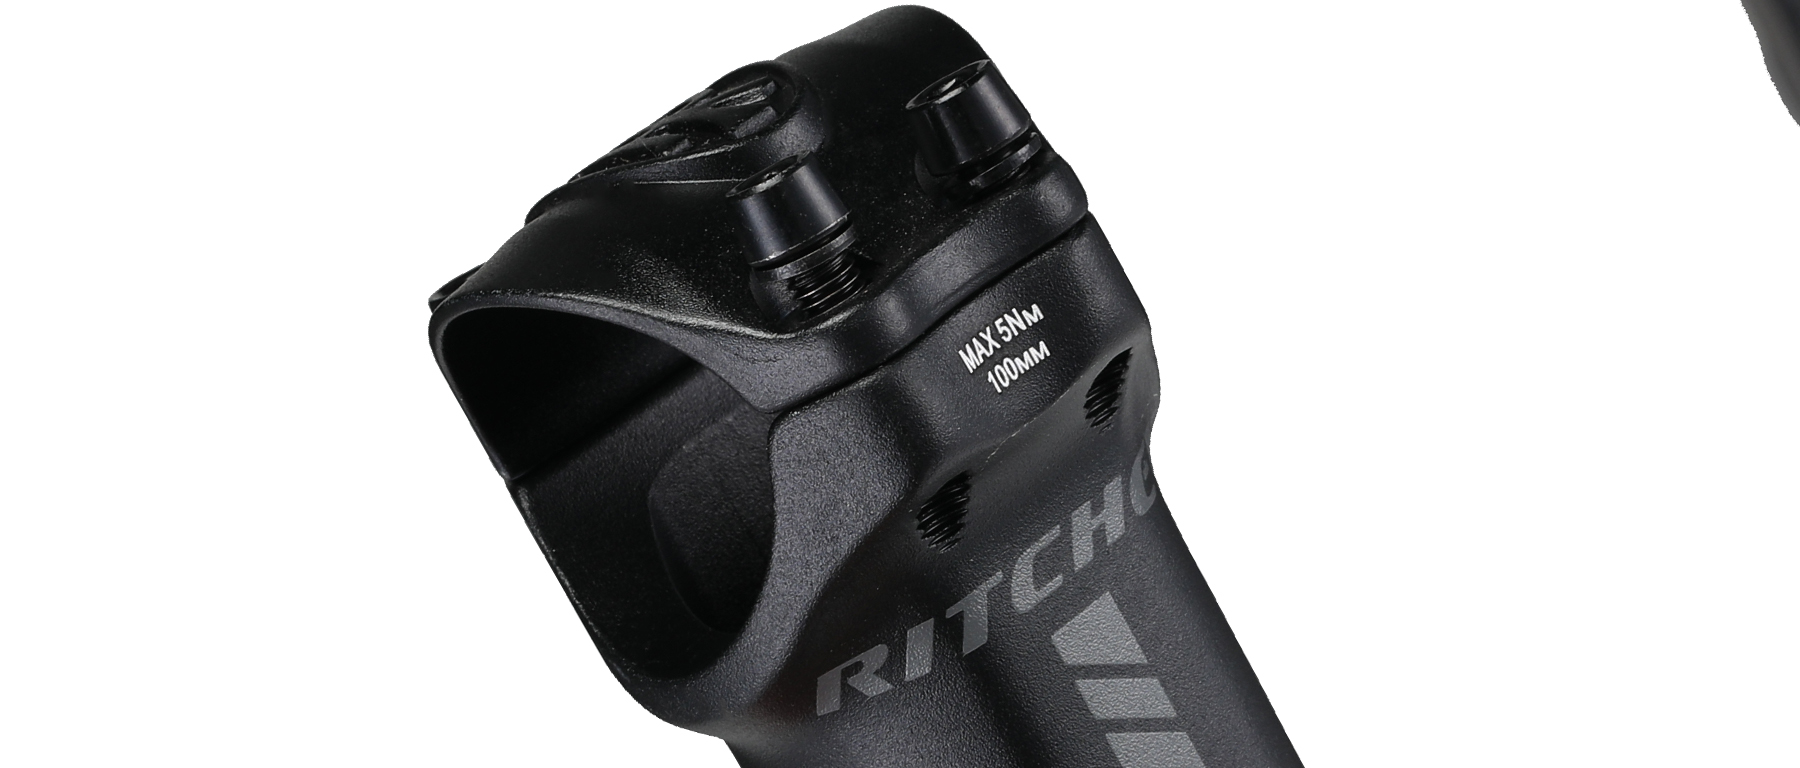 Ritchey Comp 4-Axis 30 Degree Stem